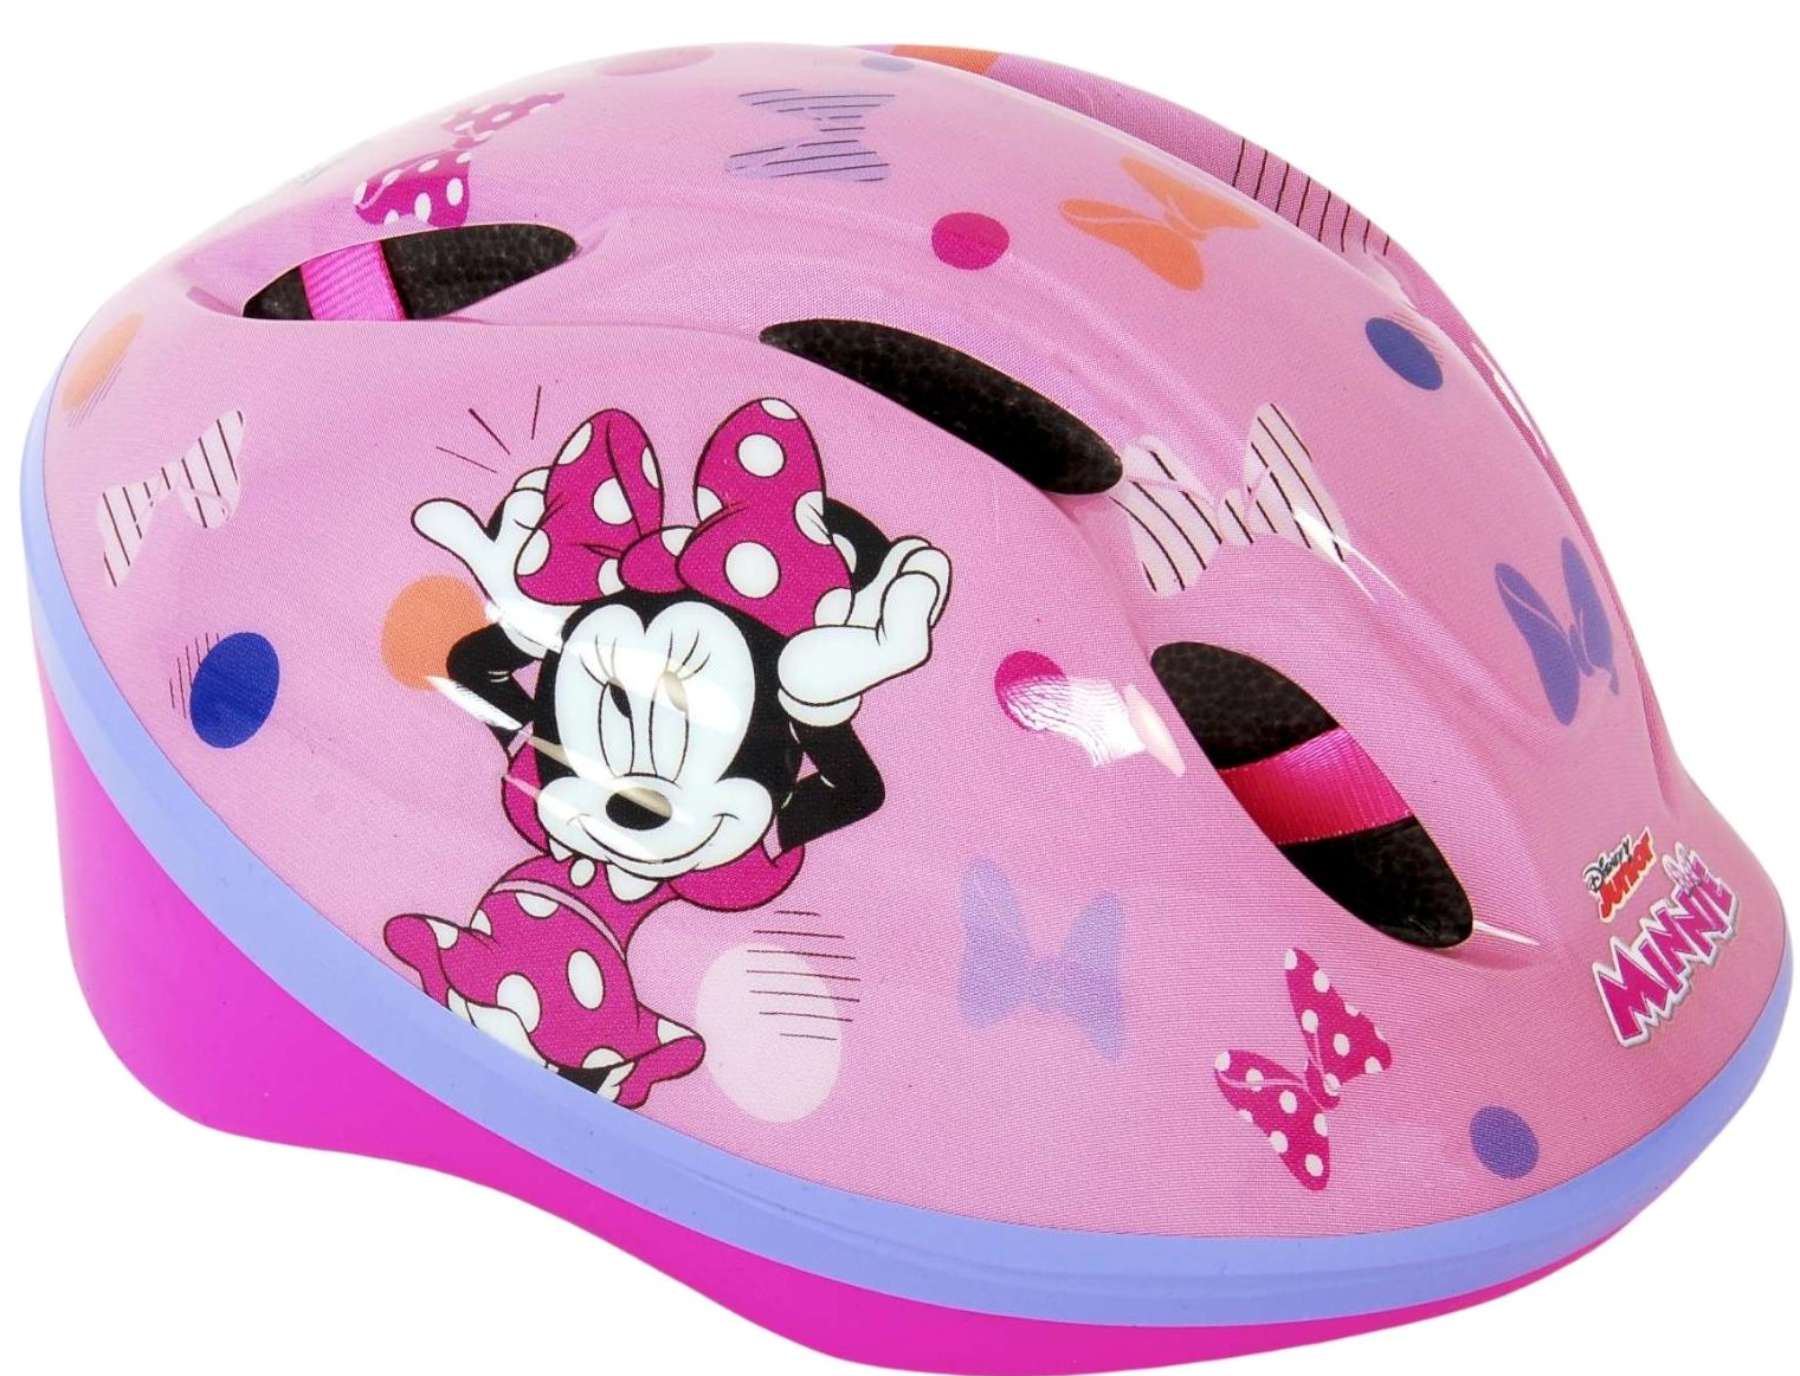 MINNIE MOUSE Girls Childrens Kids Bike Cycle Safety Helmet 3 years / 52-56cm 